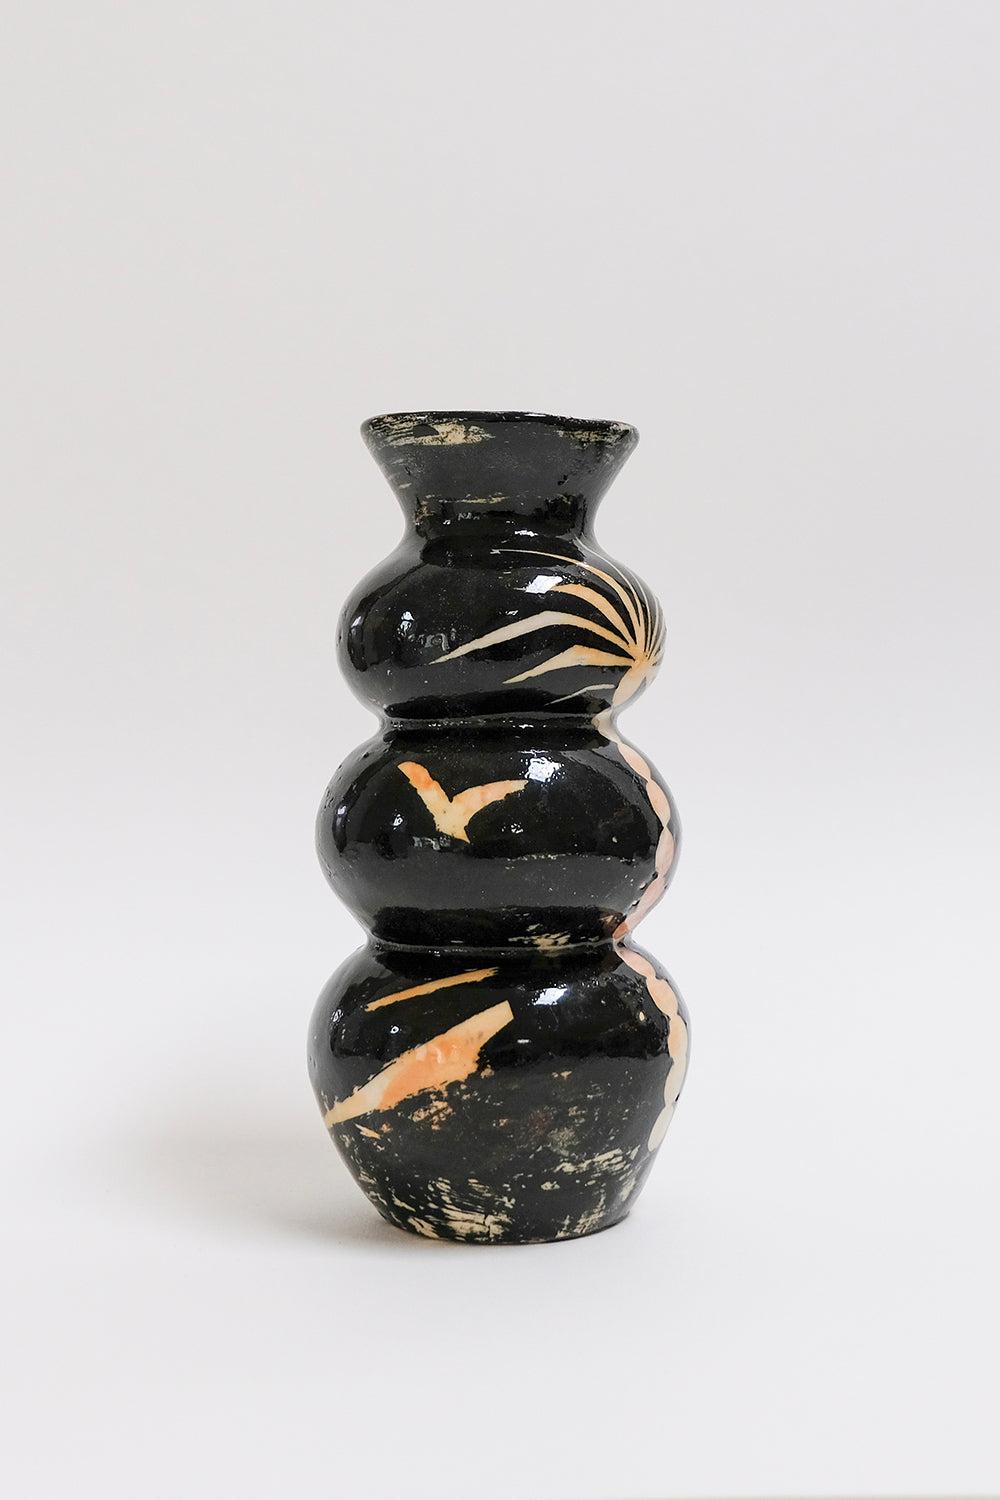 This contemporary black and peach ceramic vase is an original artwork by Canadian artist Misbah Ahmed. This piece from her collection of Mur vessels explores organic feminine forms with clay. Mur - meaning curve - uses a combination of wheel